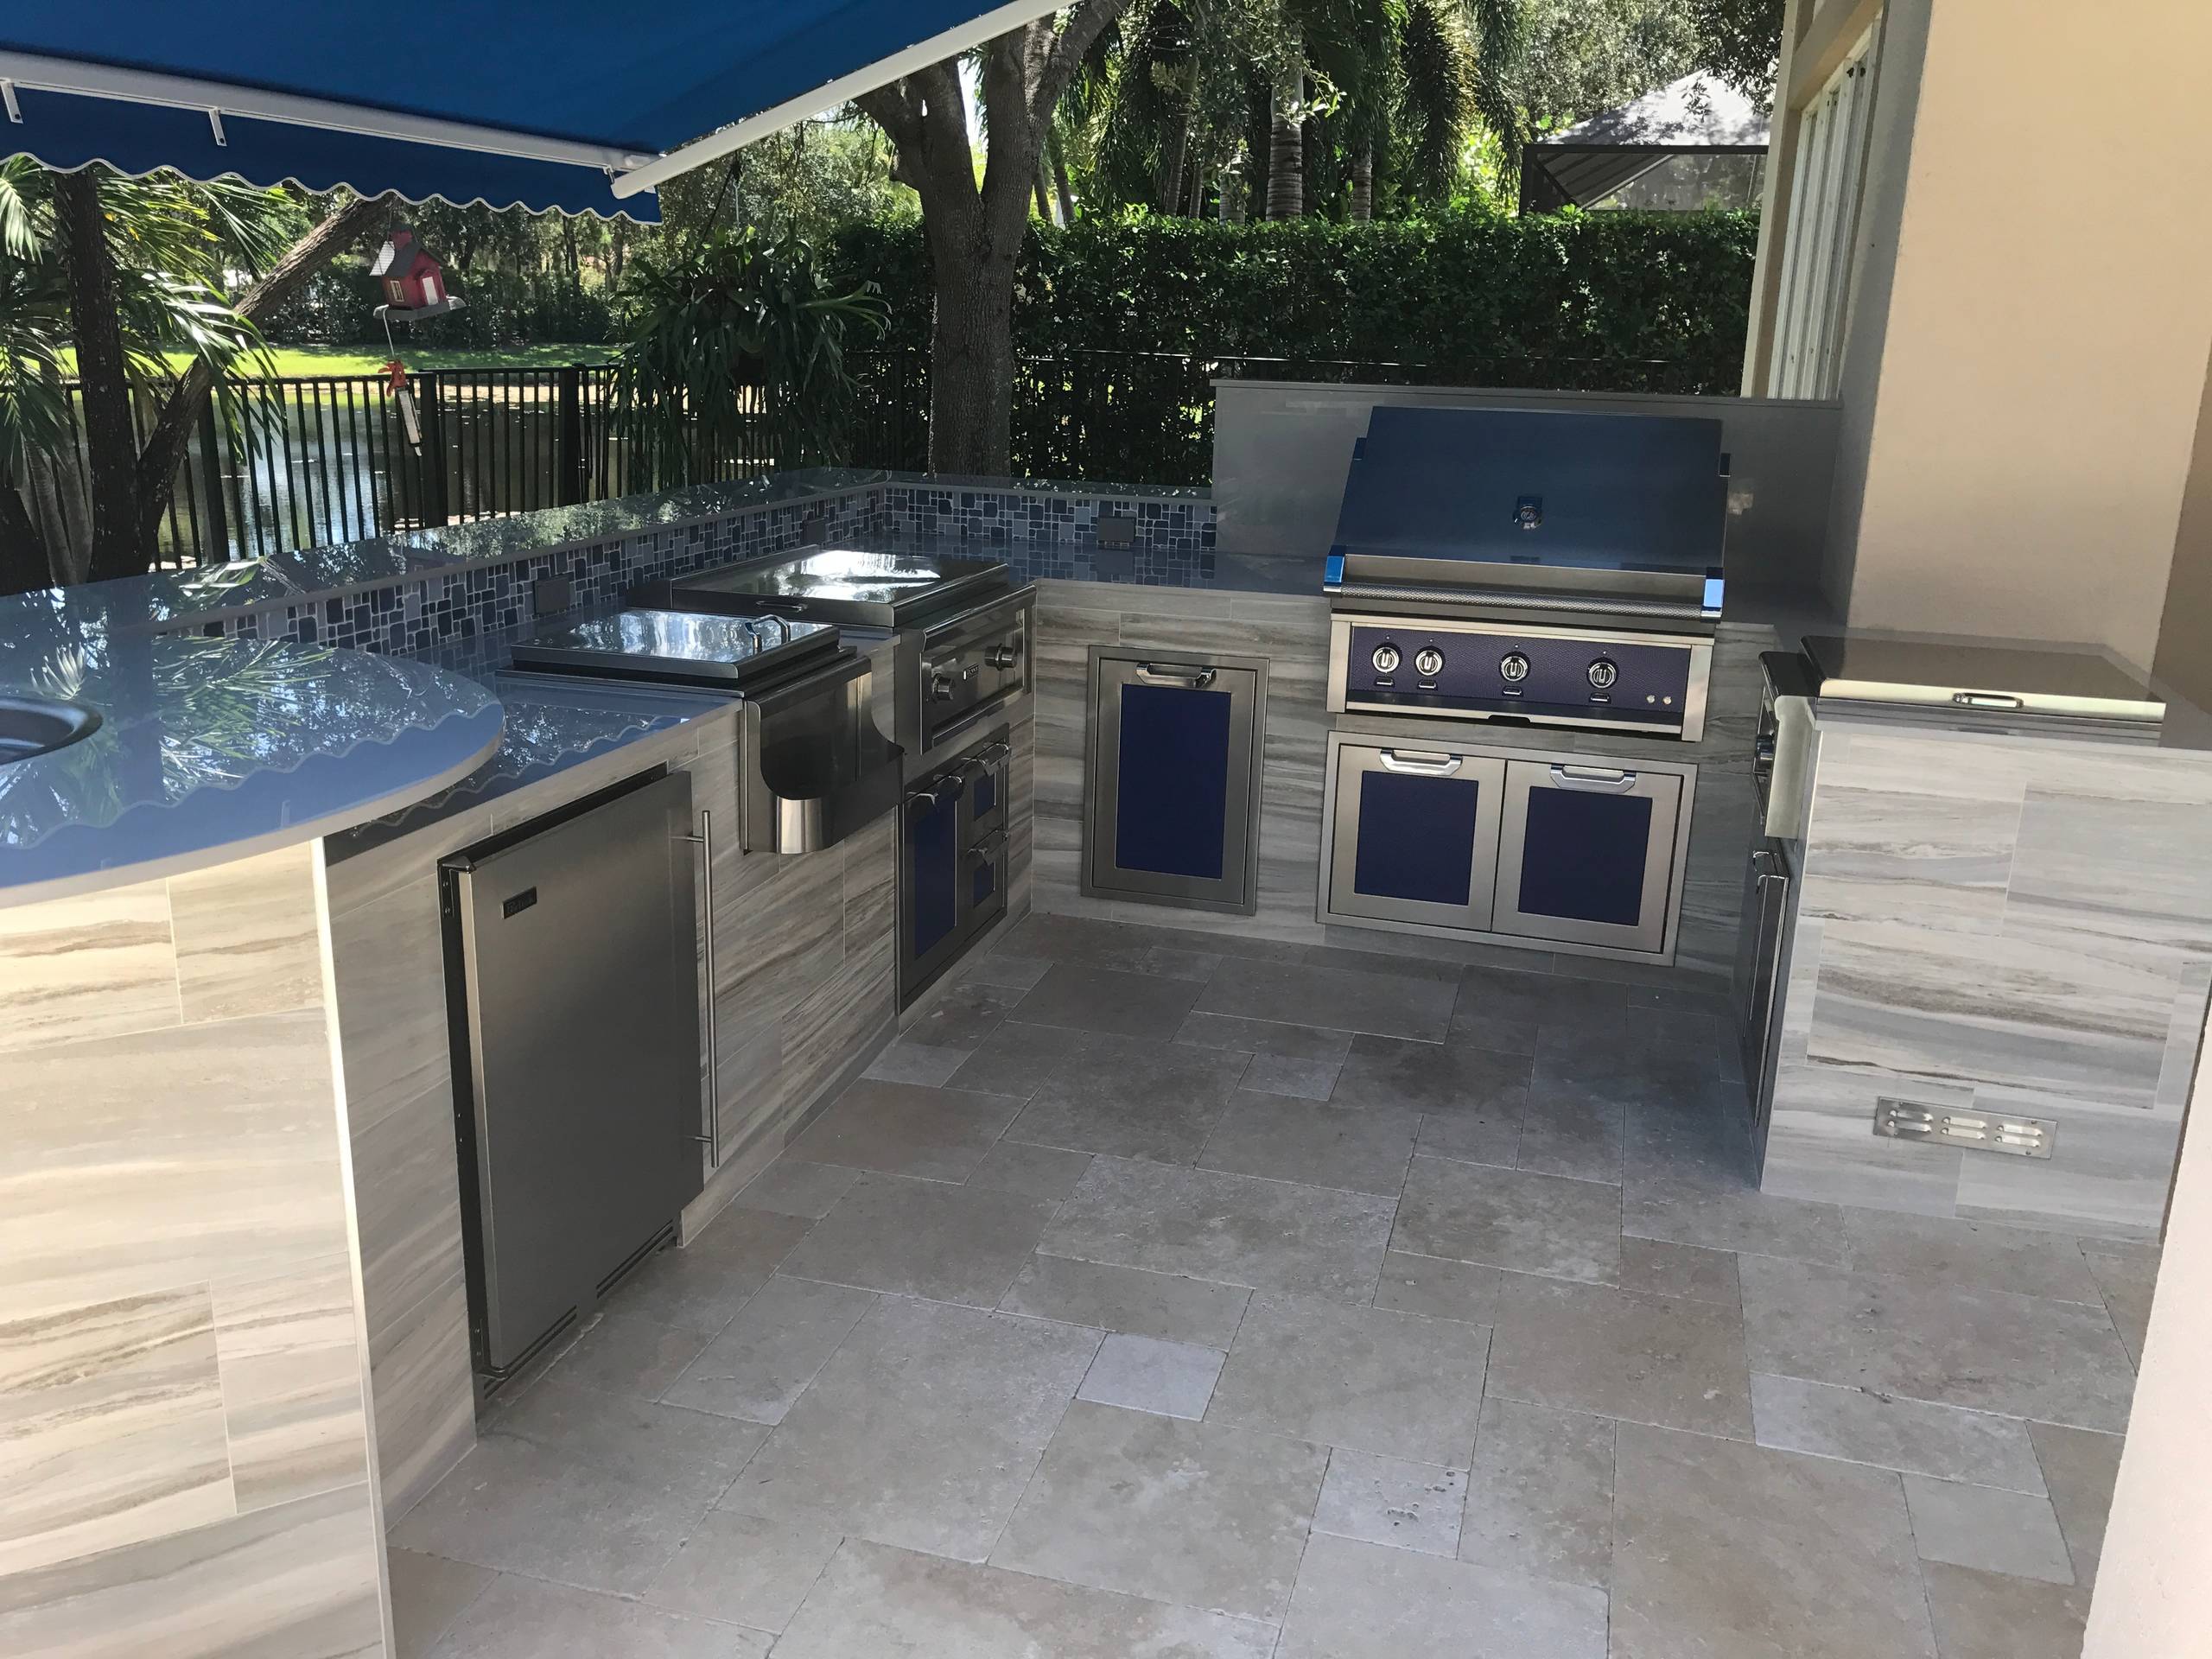 Inspiration for a tropical backyard stone patio kitchen remodel in Miami with an awning